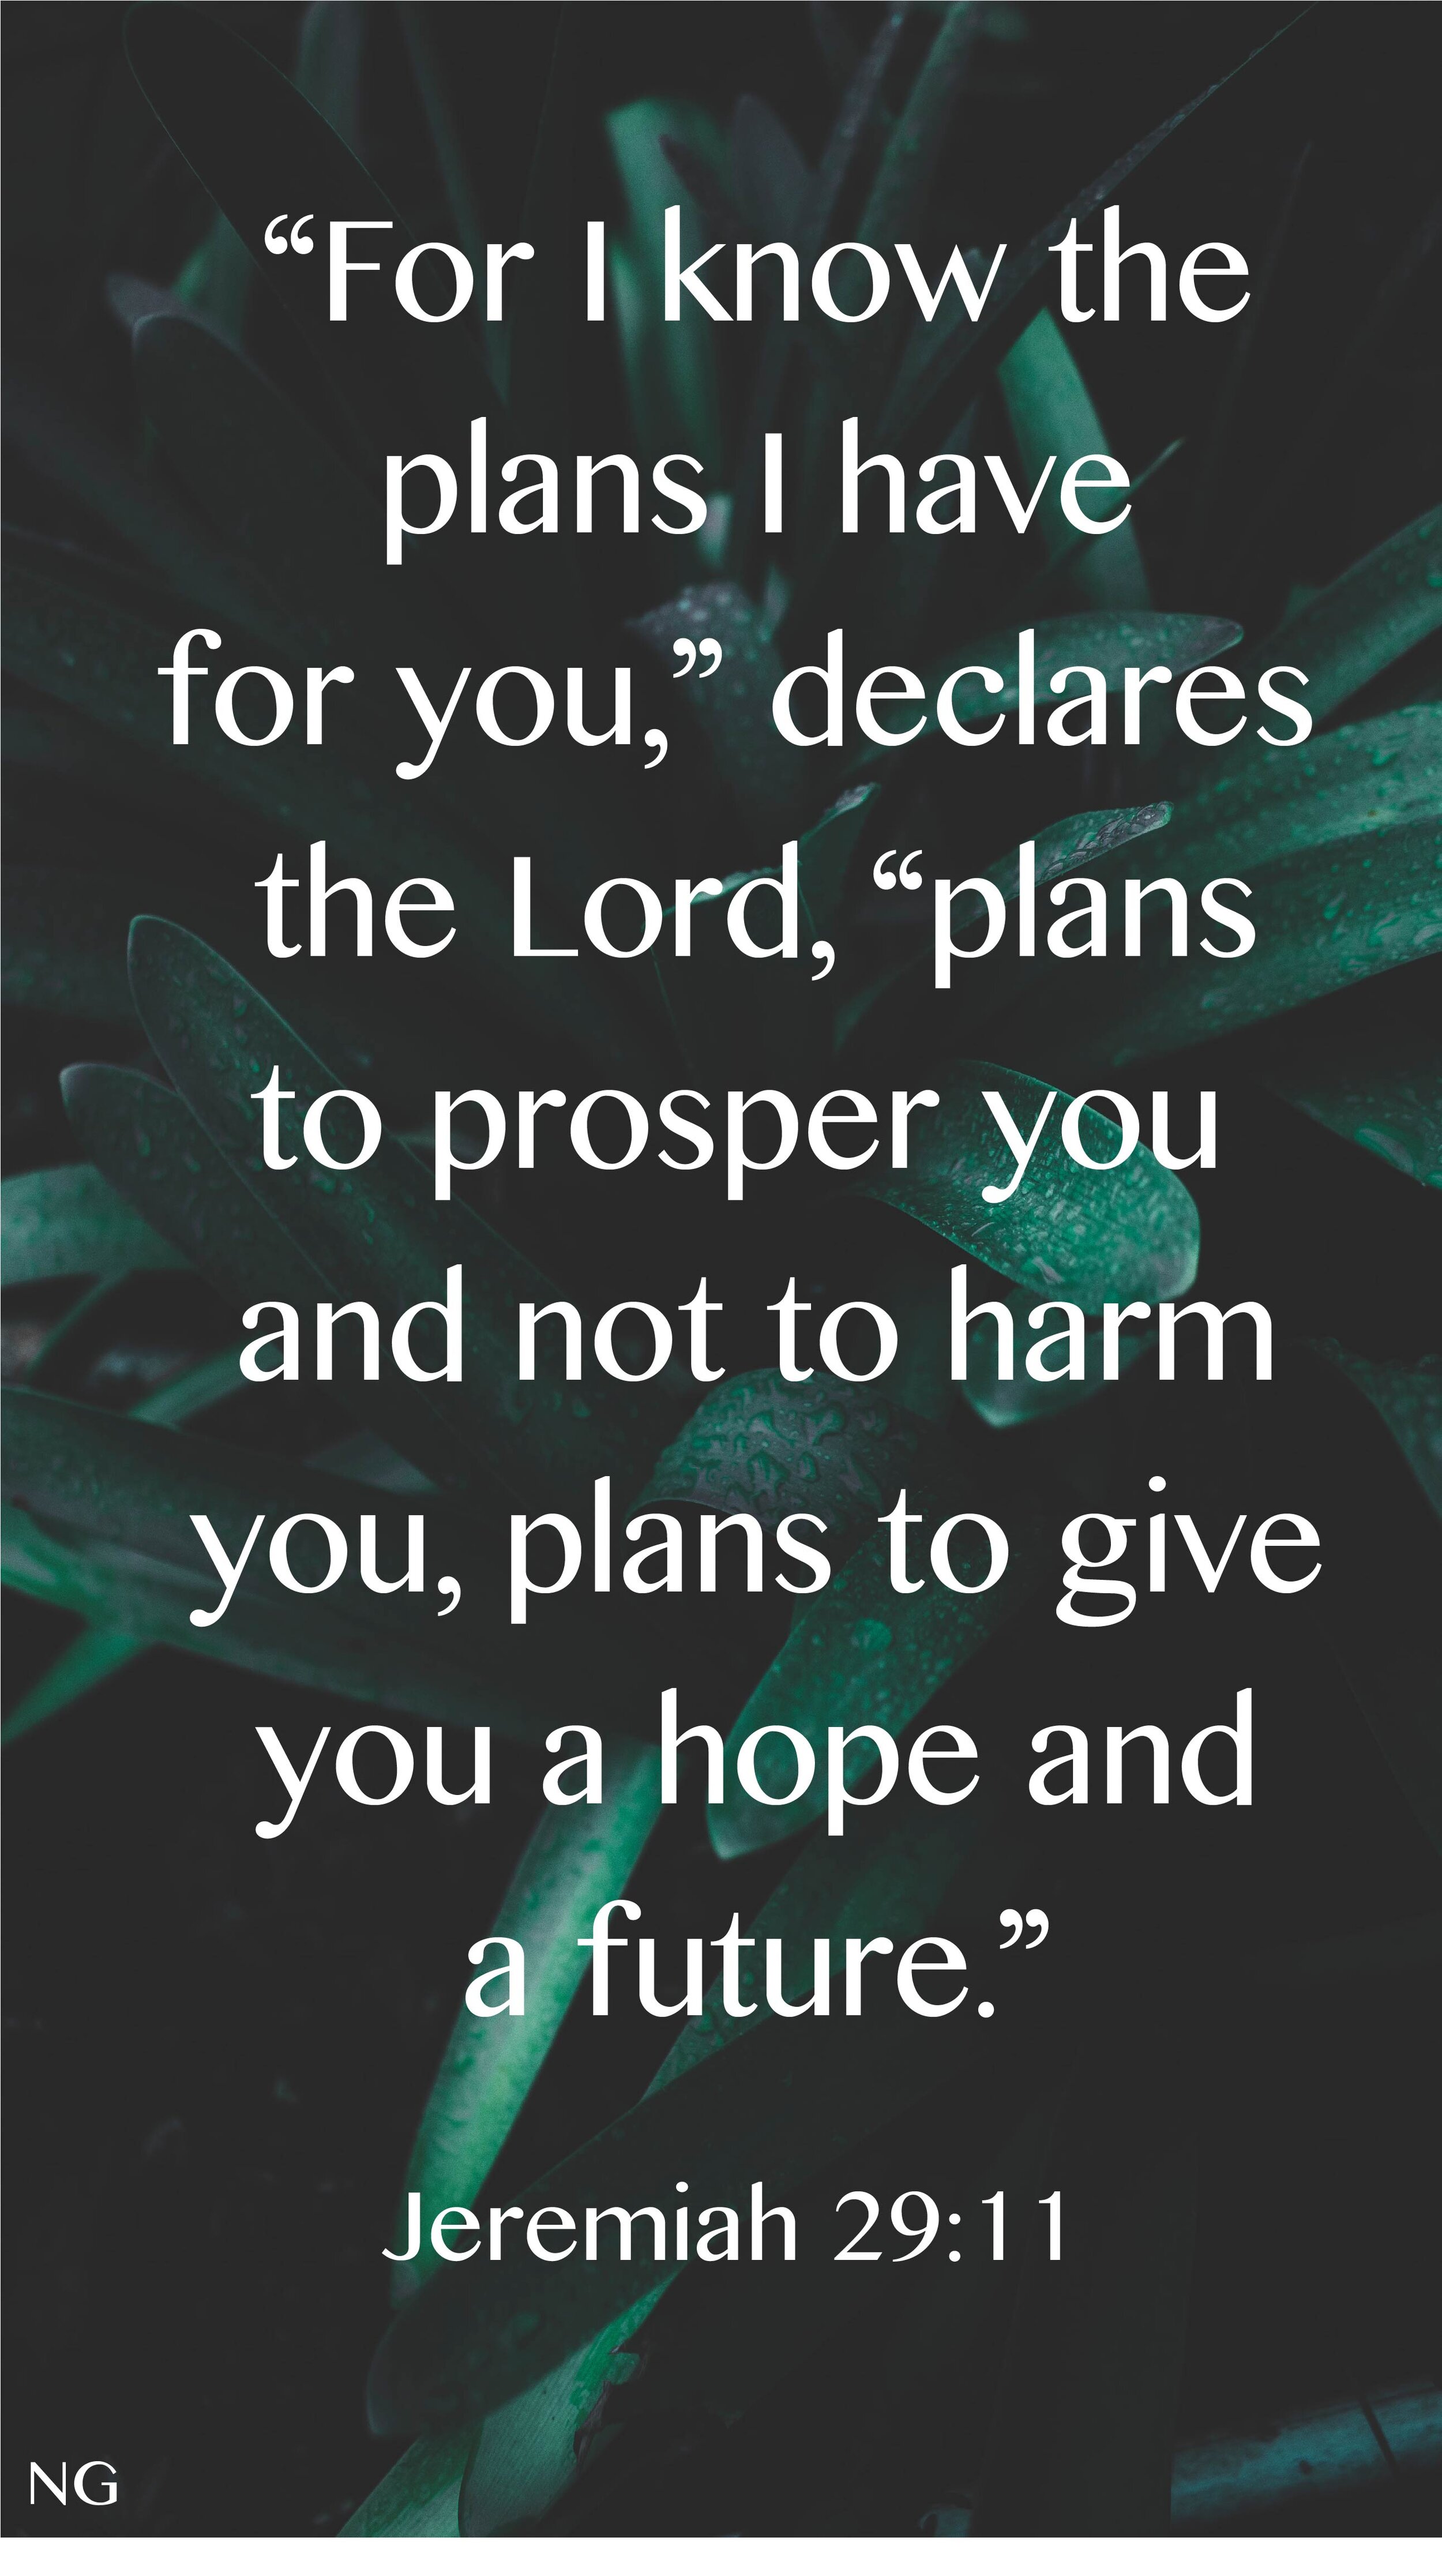 The verse of the week is Jeremiah 29:11. God knows the plans He has for your life.